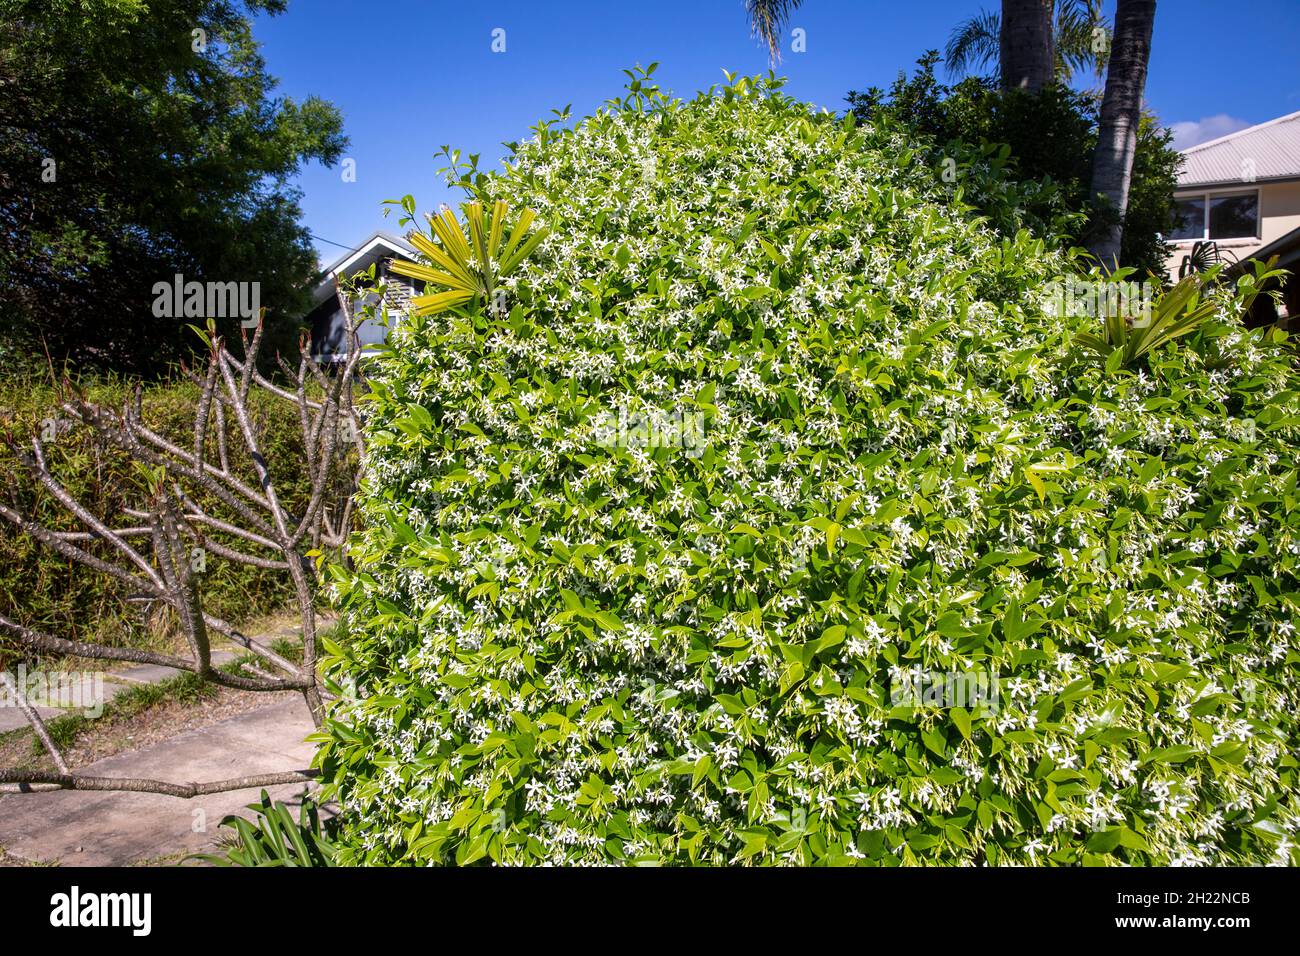 Sydney garden in Spring, frangipani tree with buds and Chinese star jasmine with white flowers, Sydney northern beaches,NSW,Australia Stock Photo